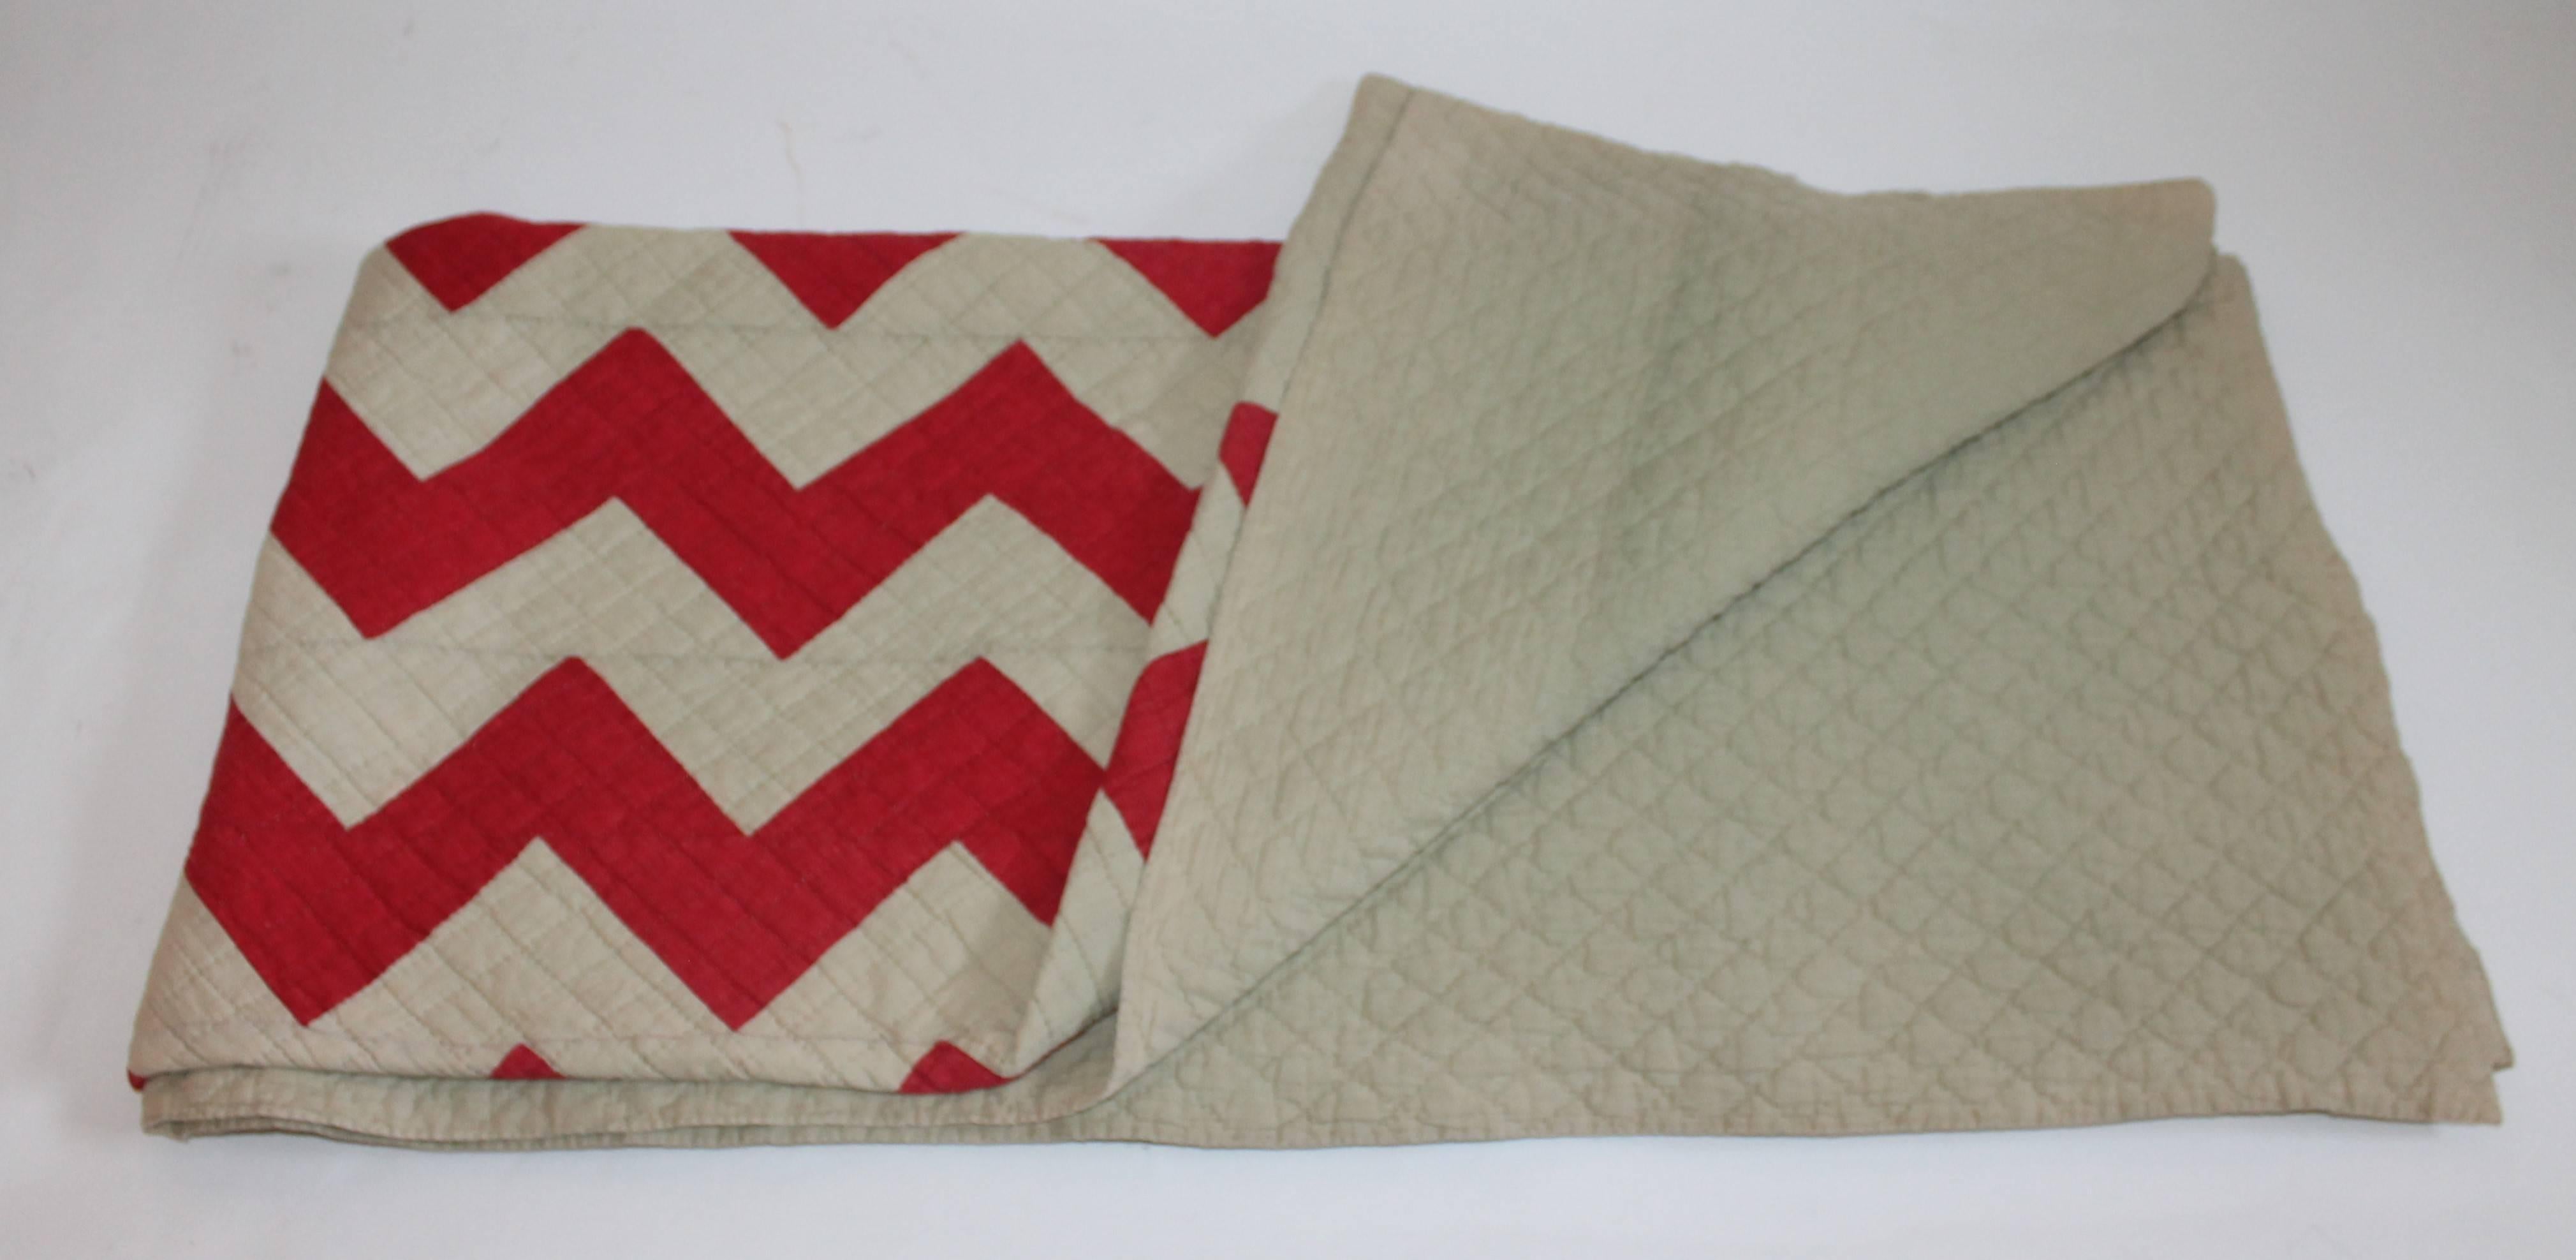 This cactus green and cherry red zigzag quilt is in cotton and tight quilting. The green is overall light and the red is quite sharp. This quilt was found in Ohio but has a great southwest look to it. Condition is very good.